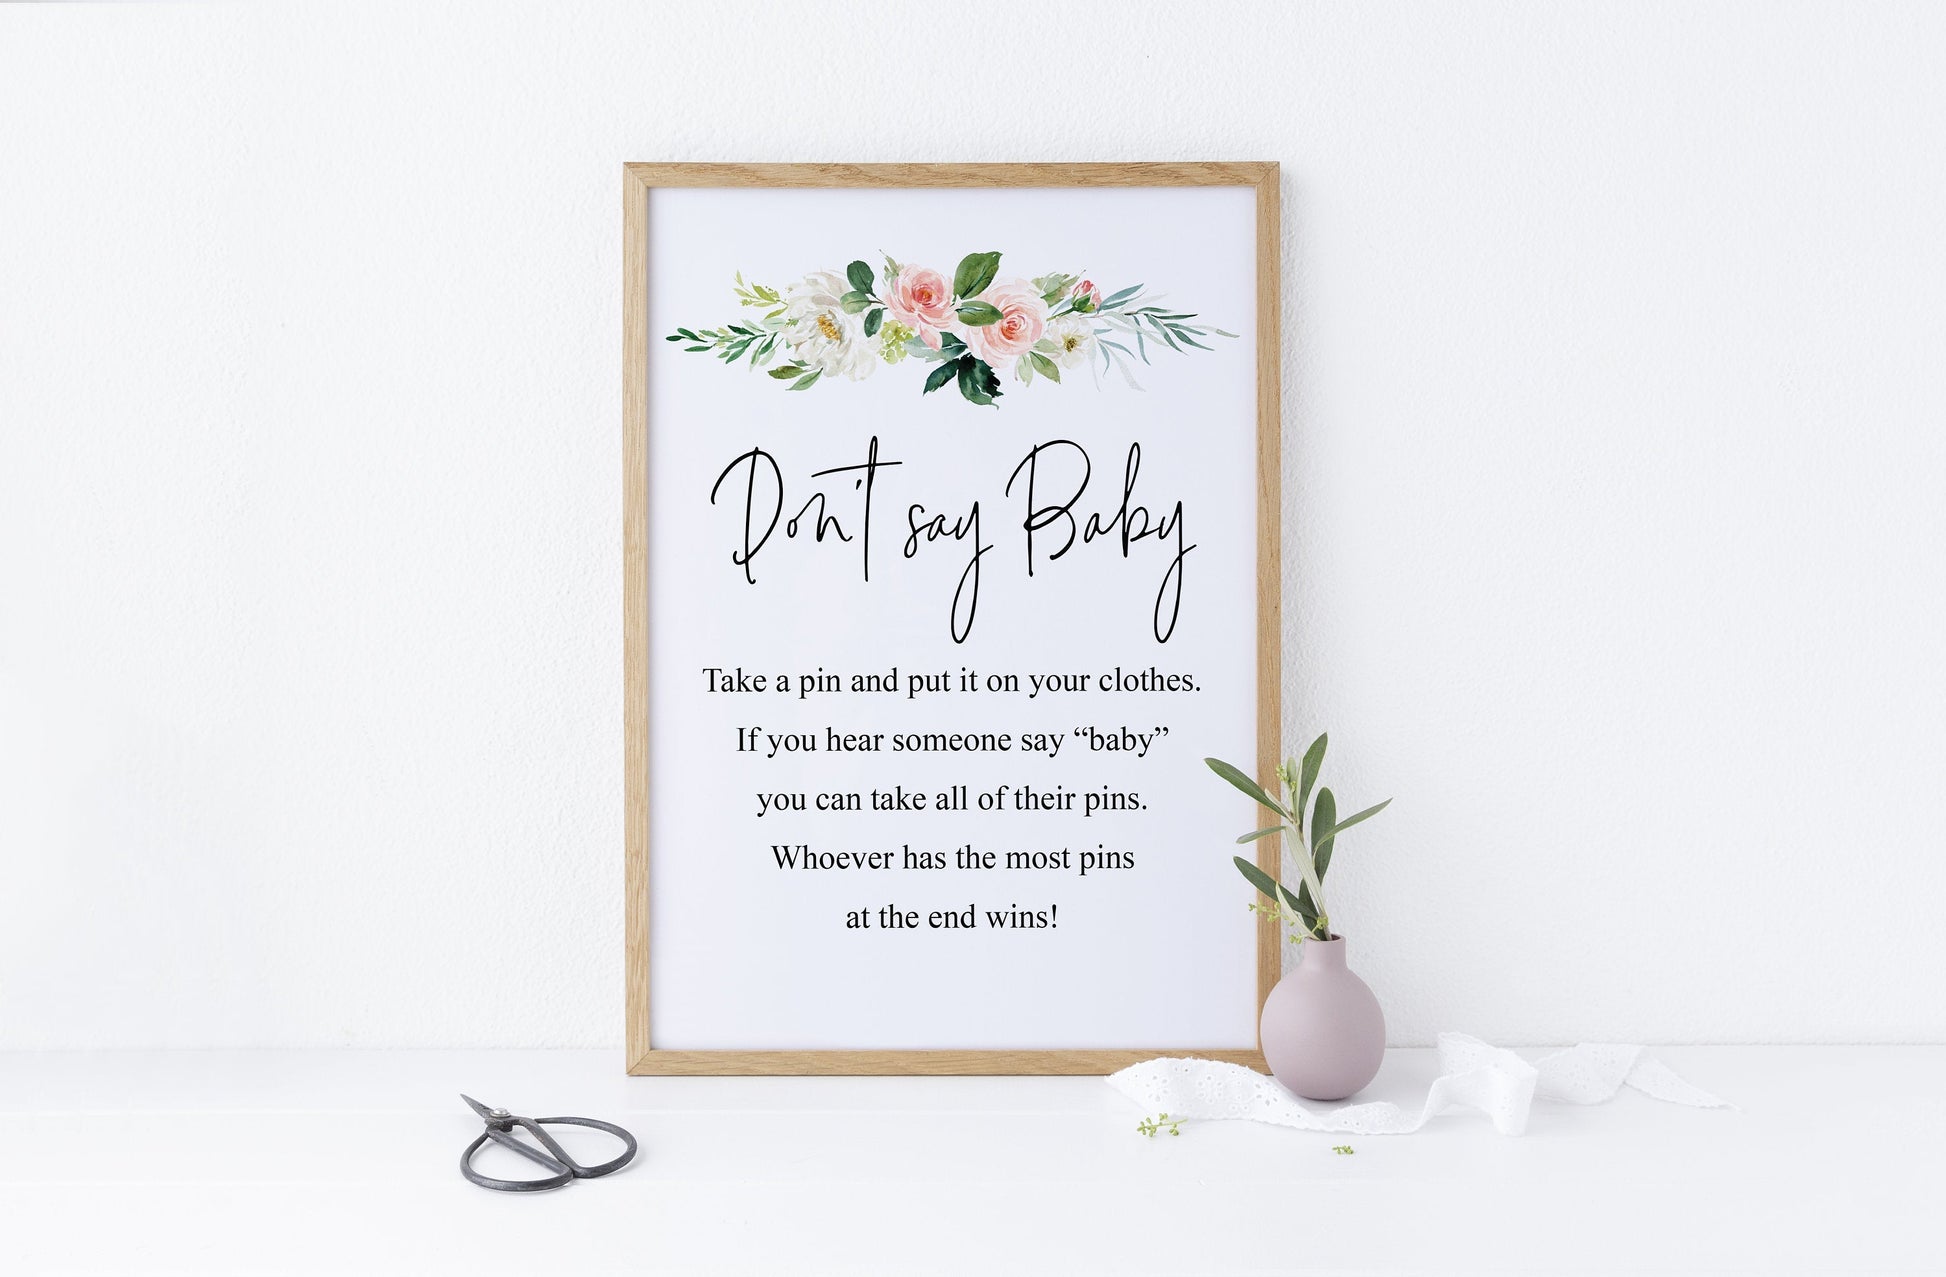 Boho Baby Shower games Don't Say Baby printable